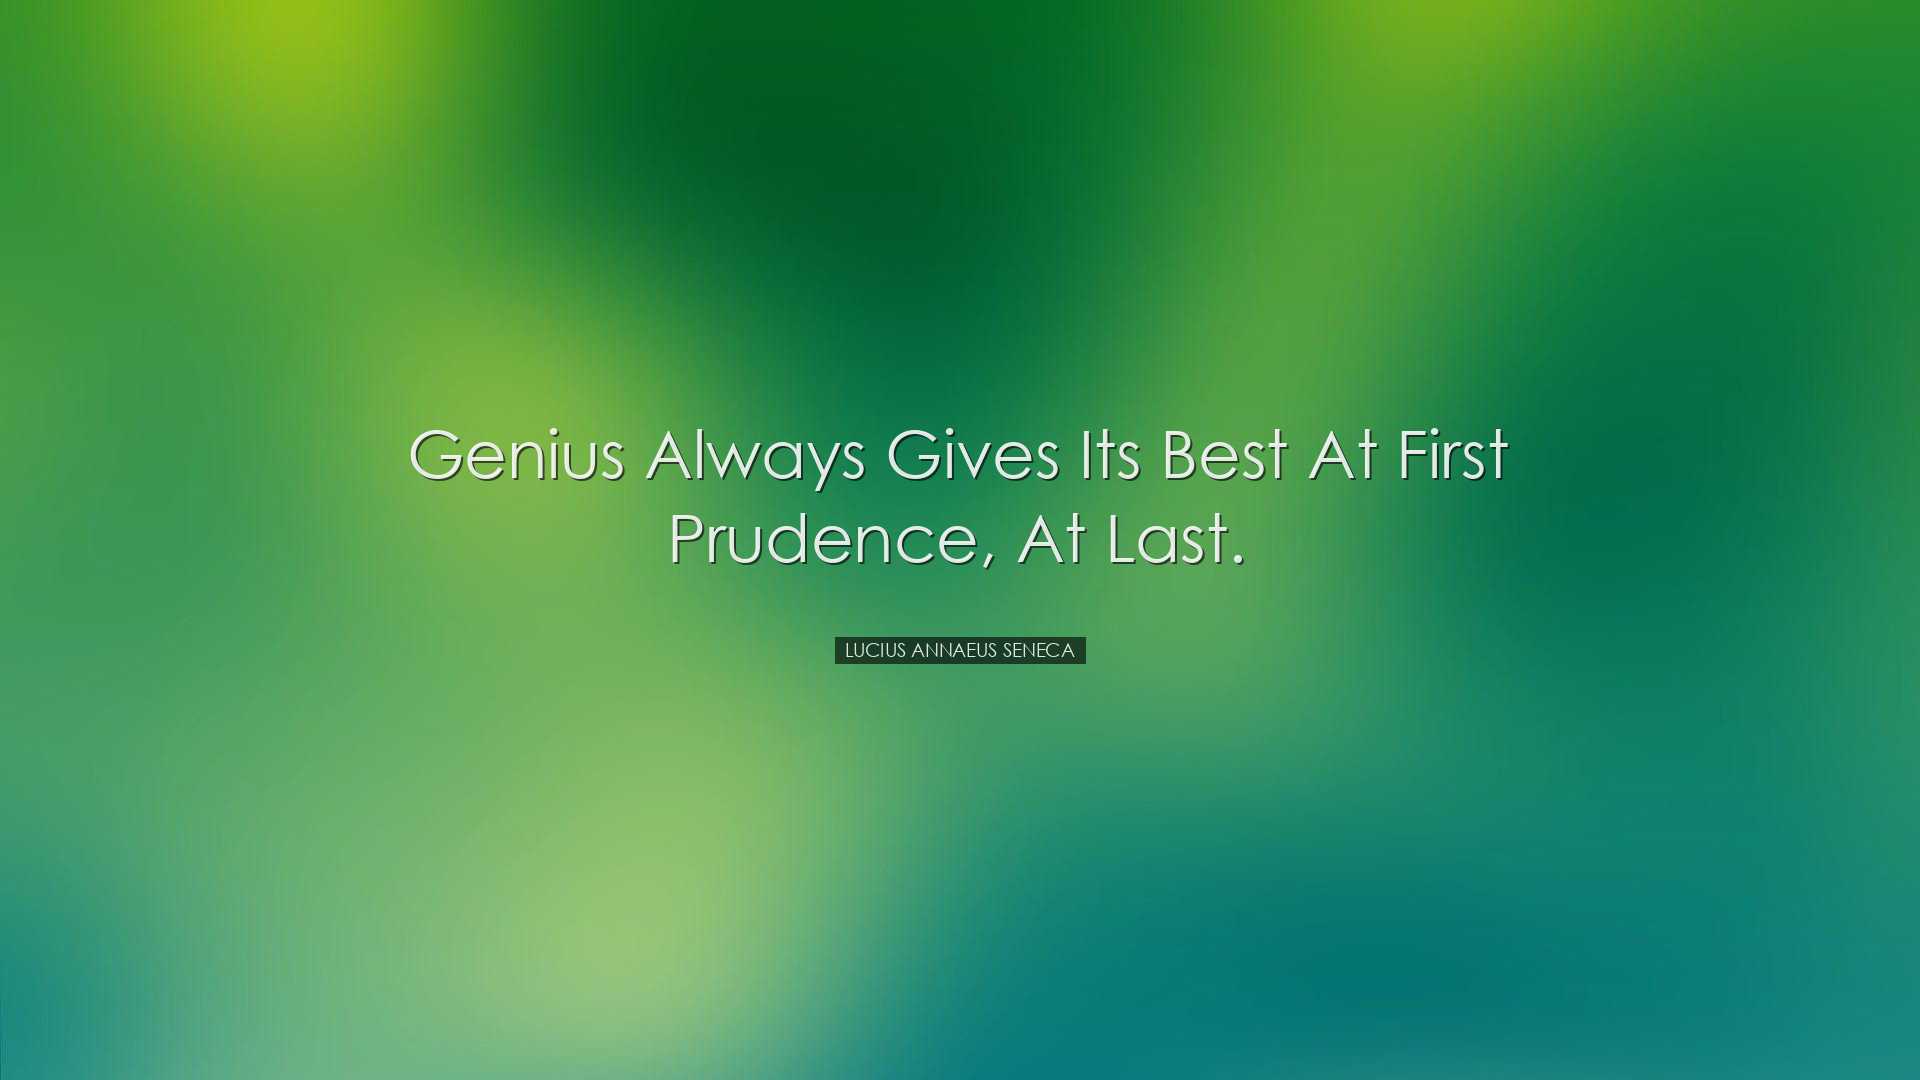 Genius always gives its best at first prudence, at last. - Lucius